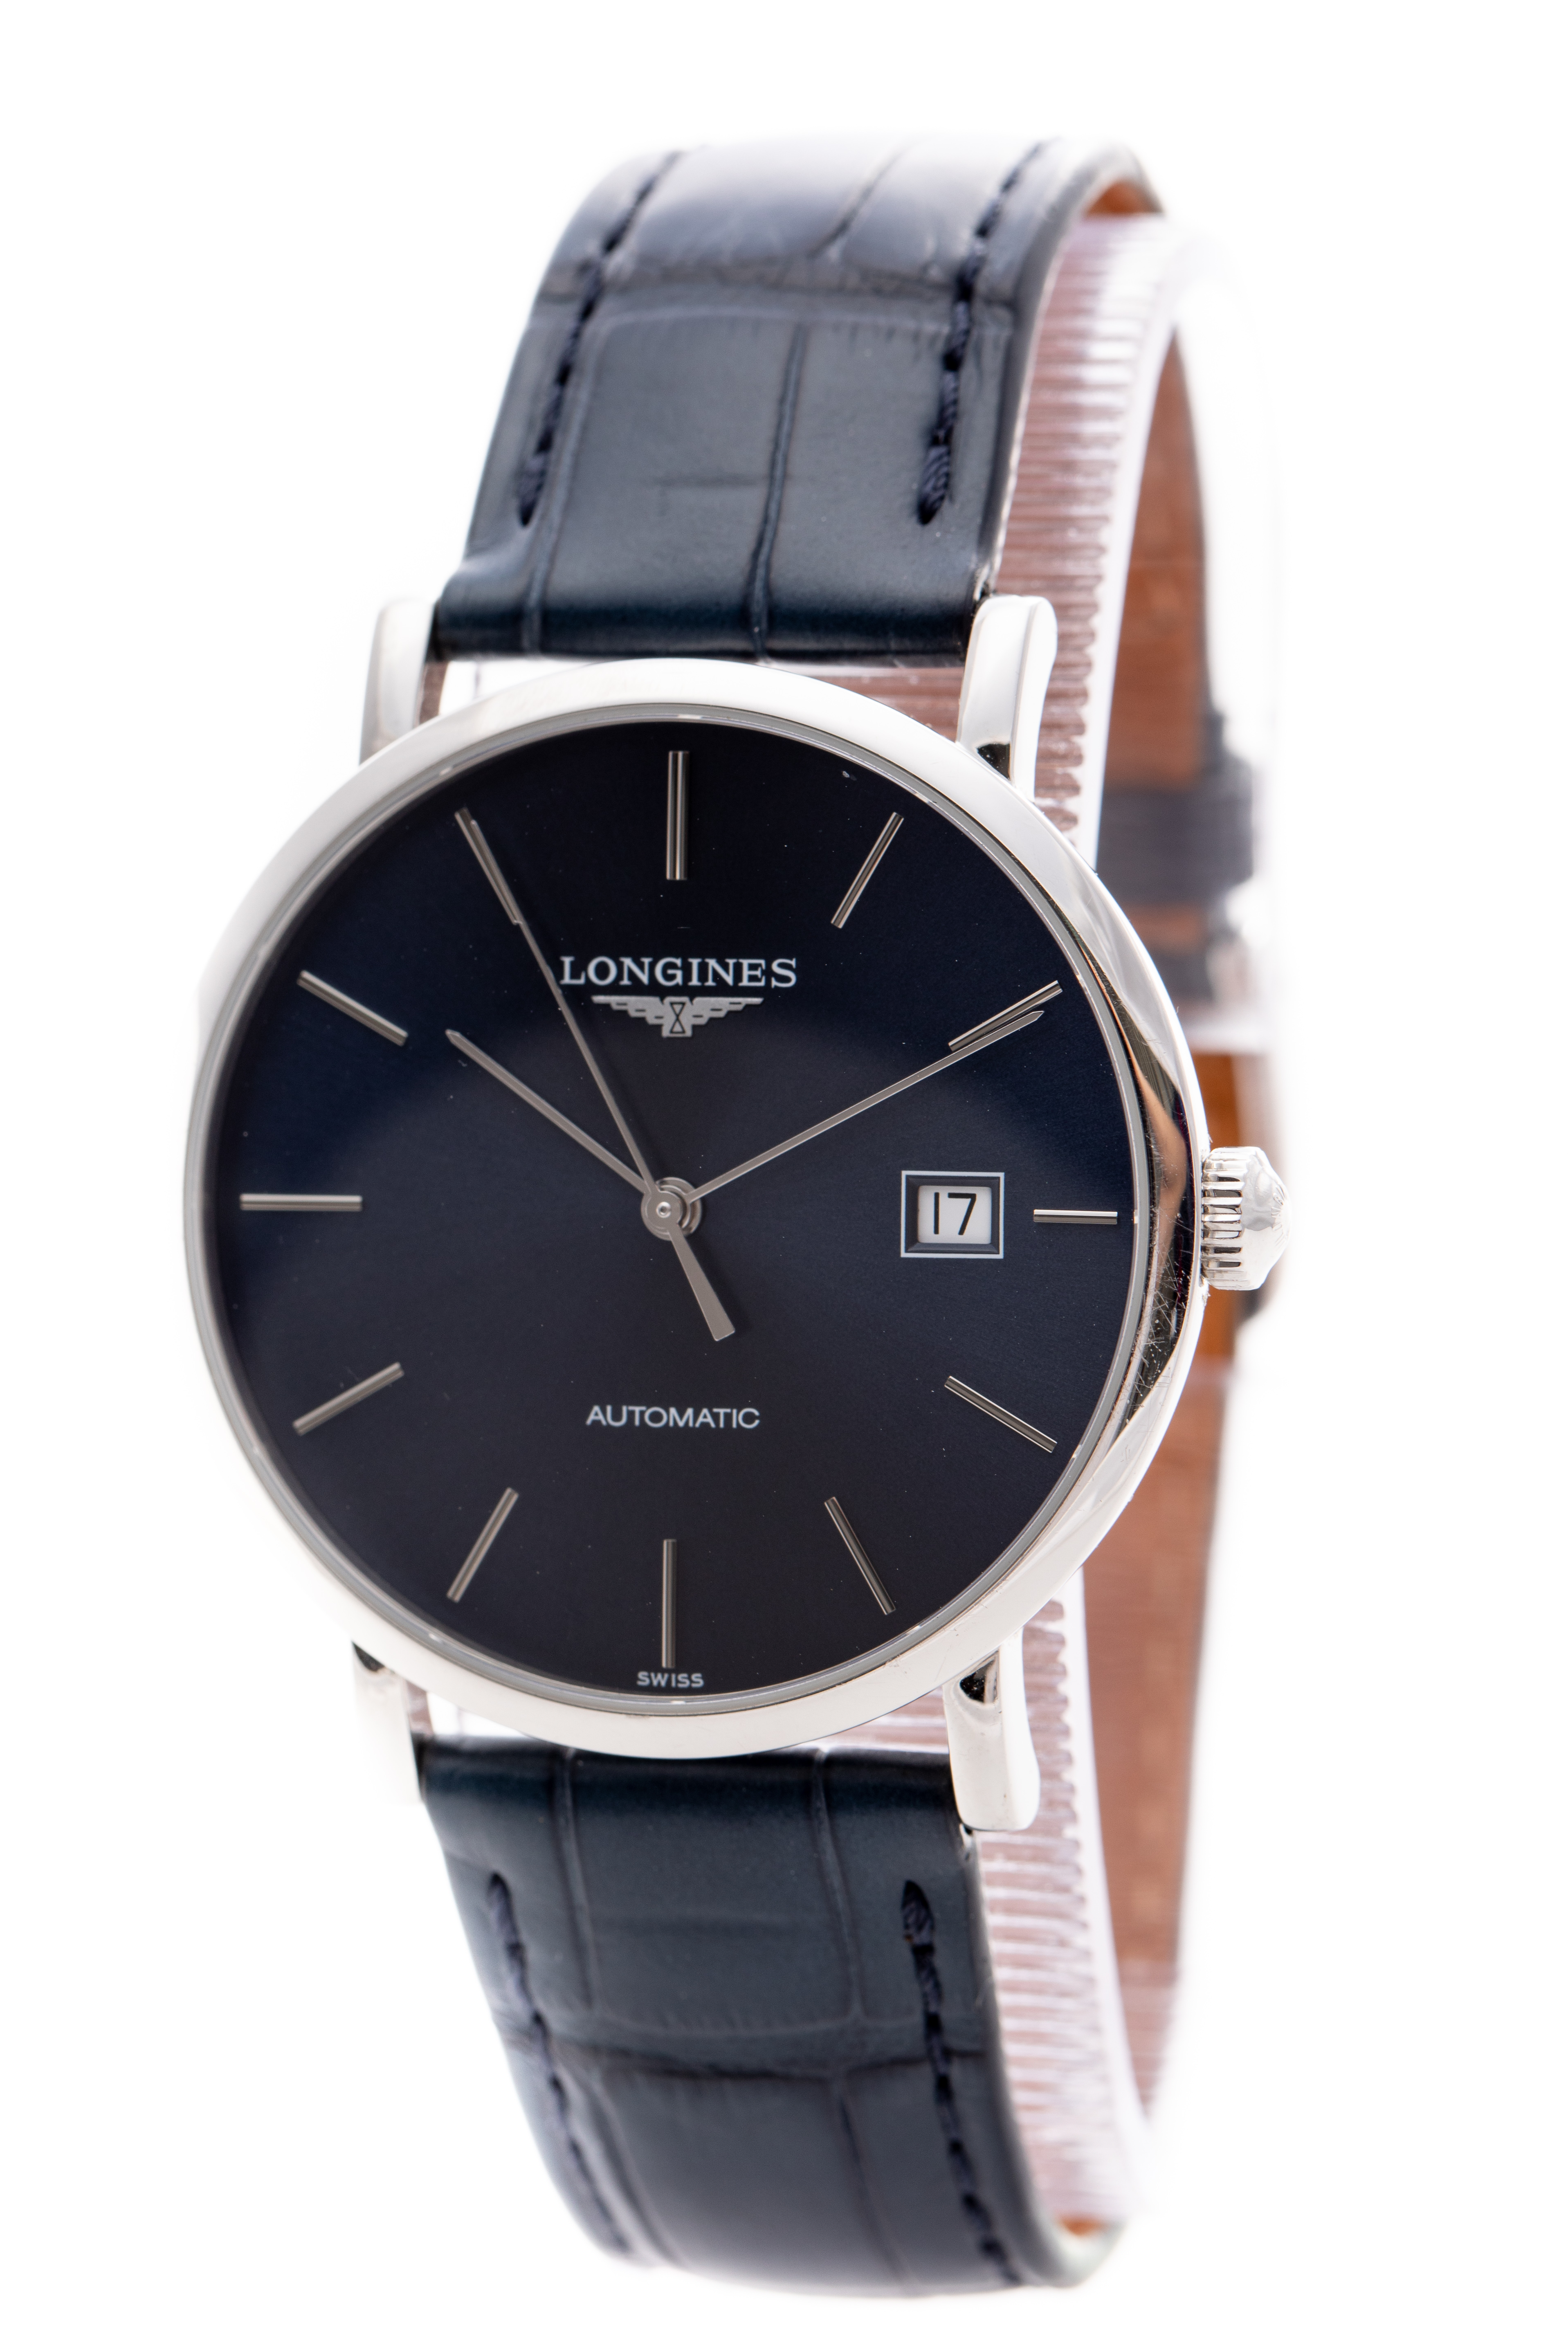 LONGINES ELEGANT COLLECTION AUTOMATIC 39MM STEEL REF:L4.910.4